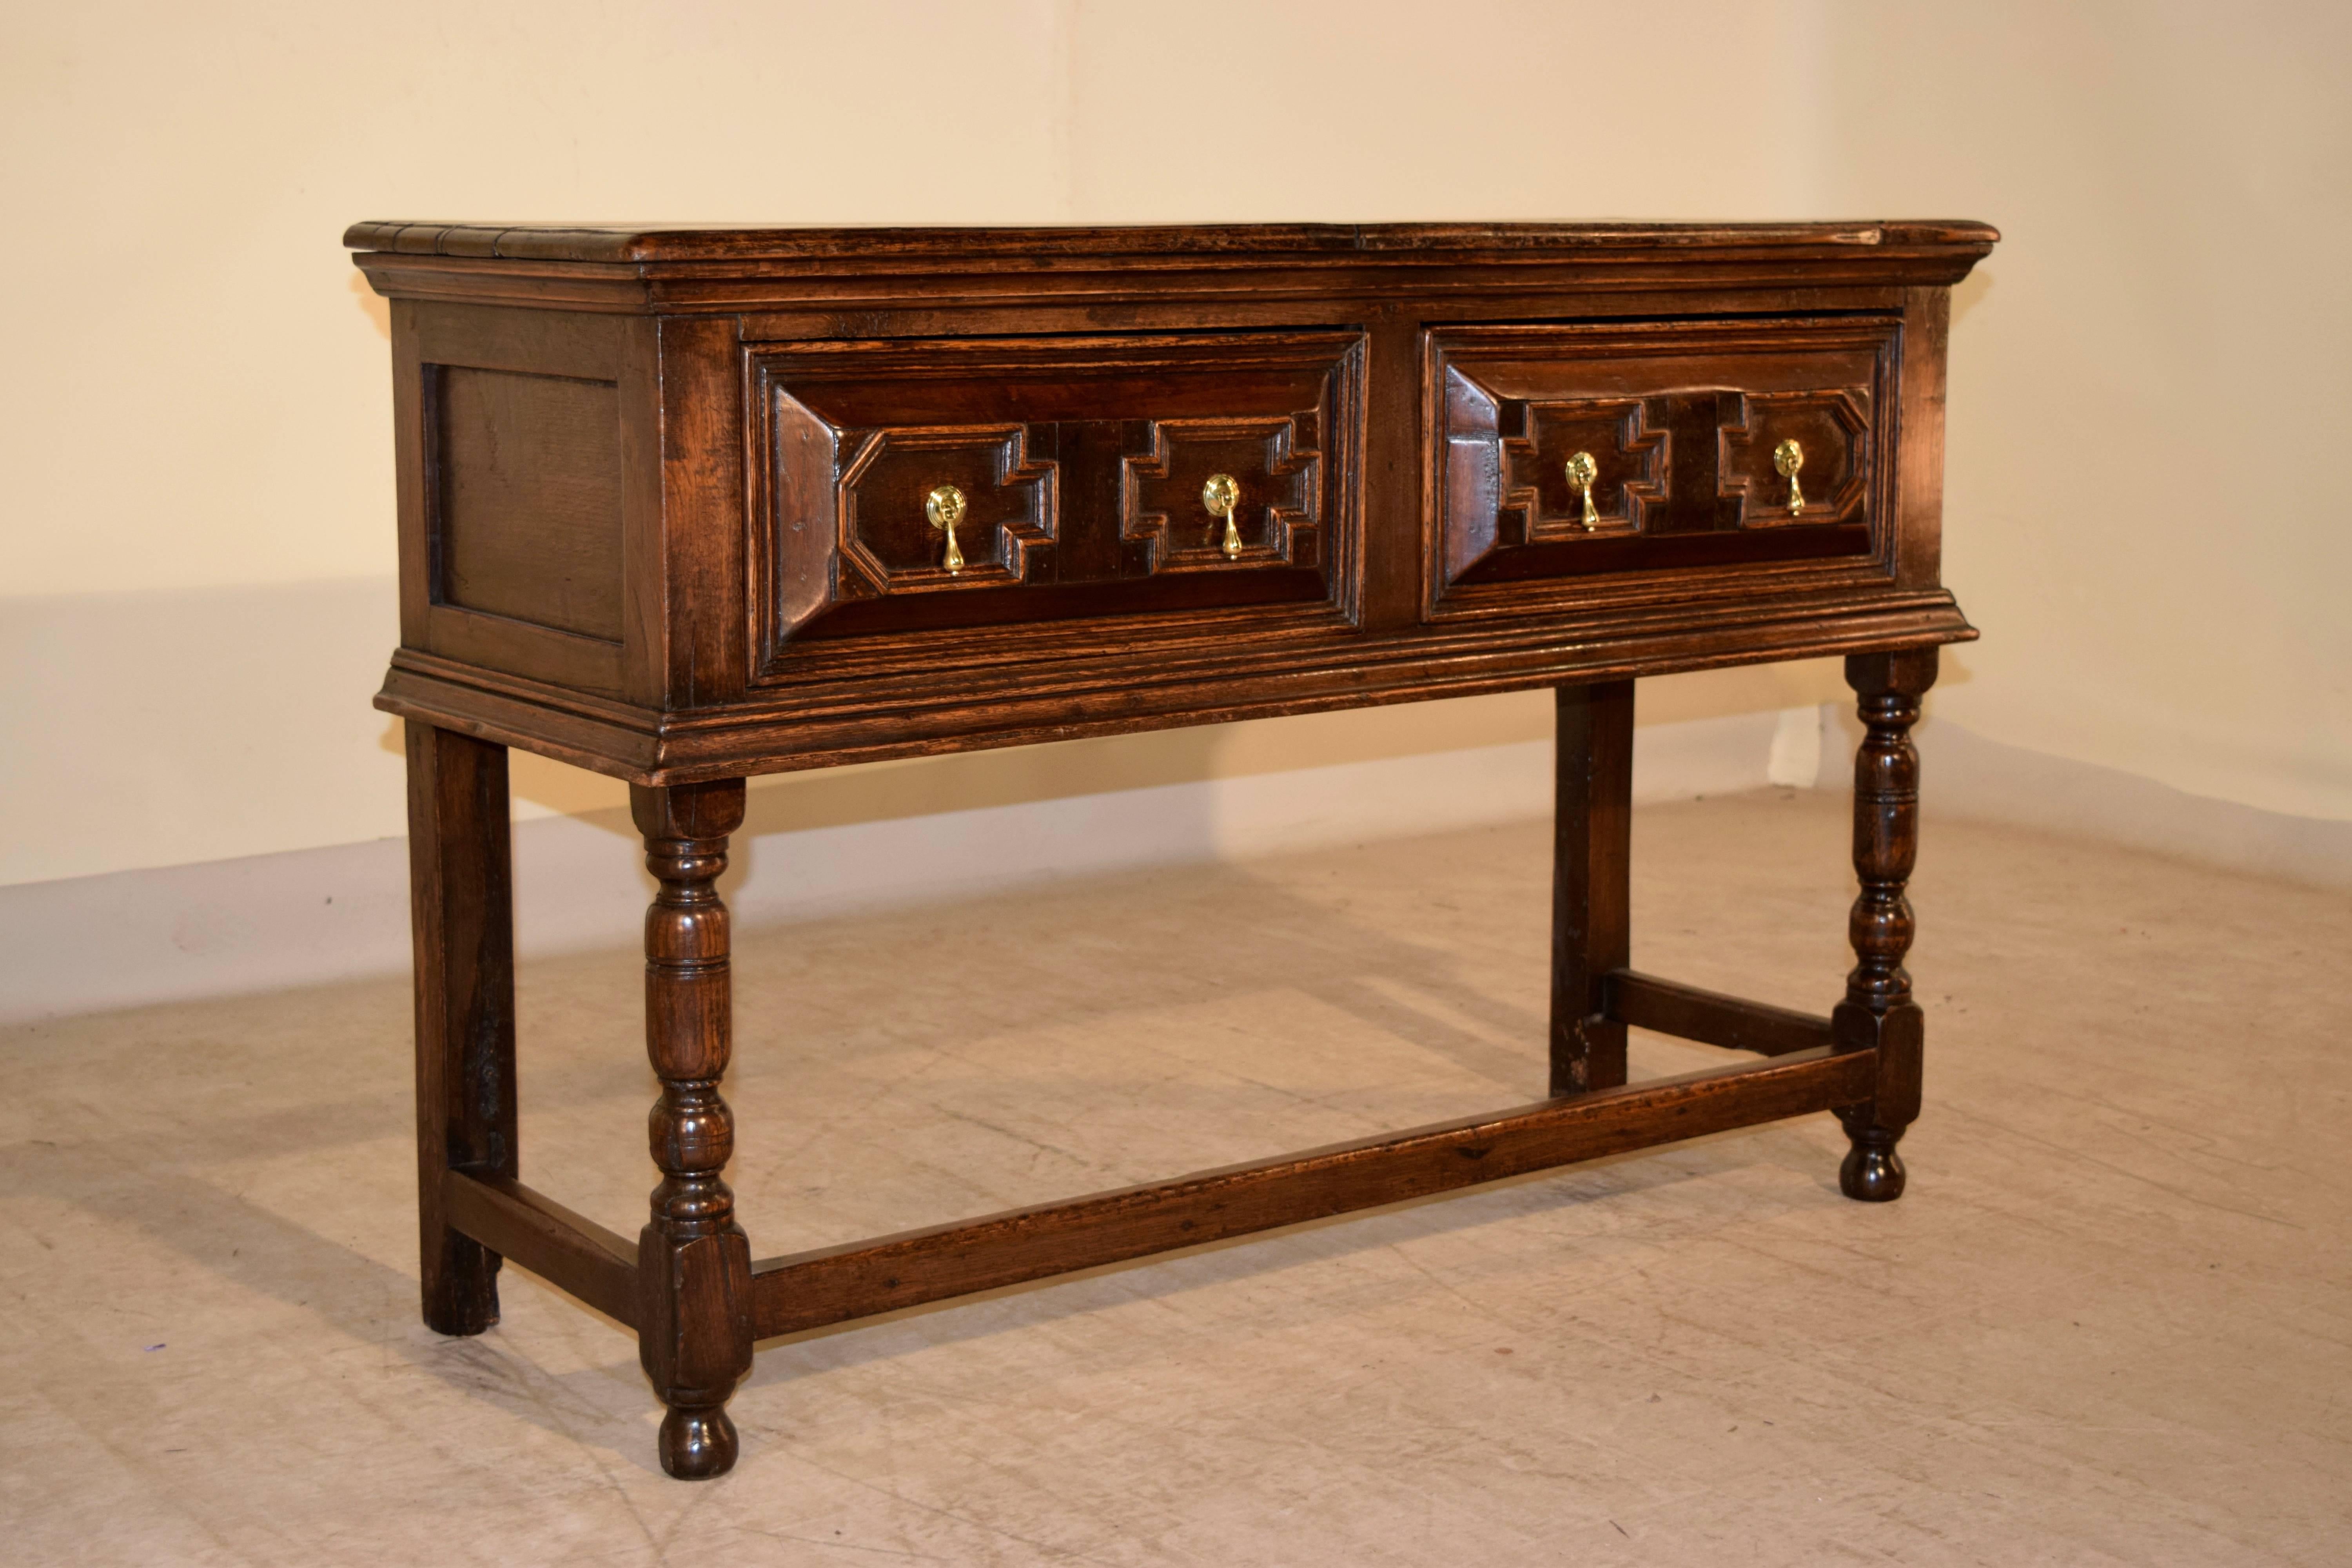 17th century English oak sideboard with a plank top, following down to panelled sides and raised panel geometric drawer fronts. The front legs are hand-turned and the back legs are squared for fitting against a wall. They are all joined by